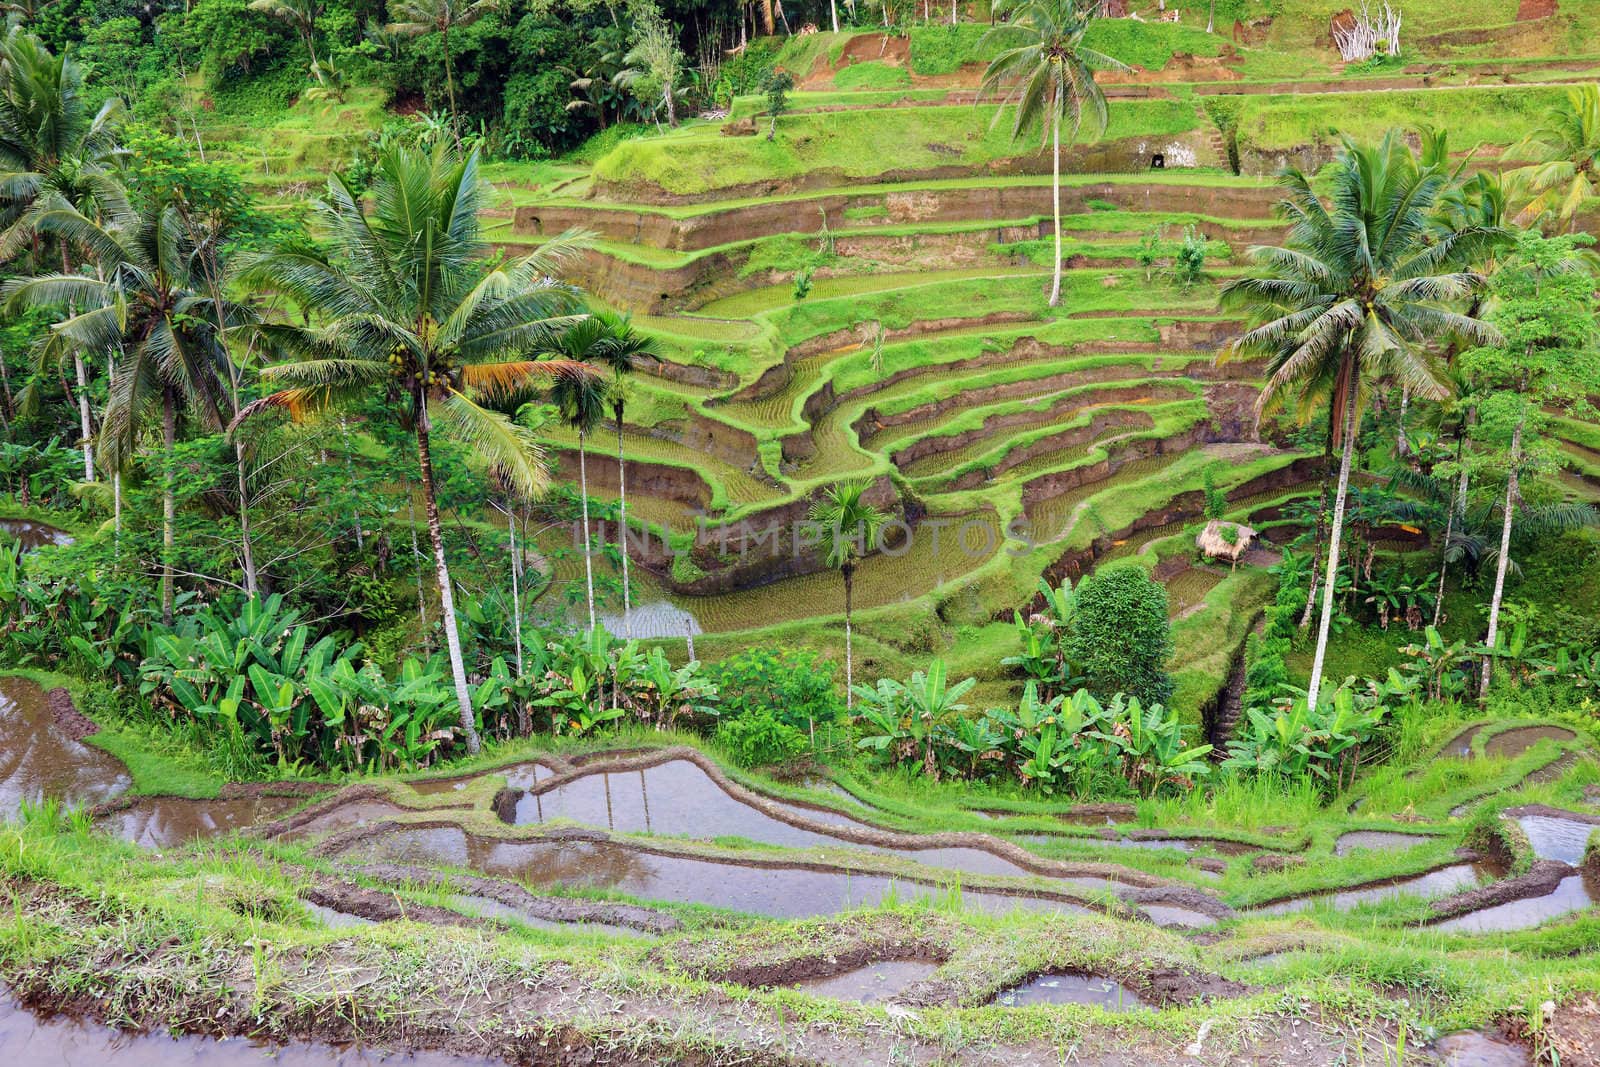 Balinese rice terraces landscape, Indonesia.